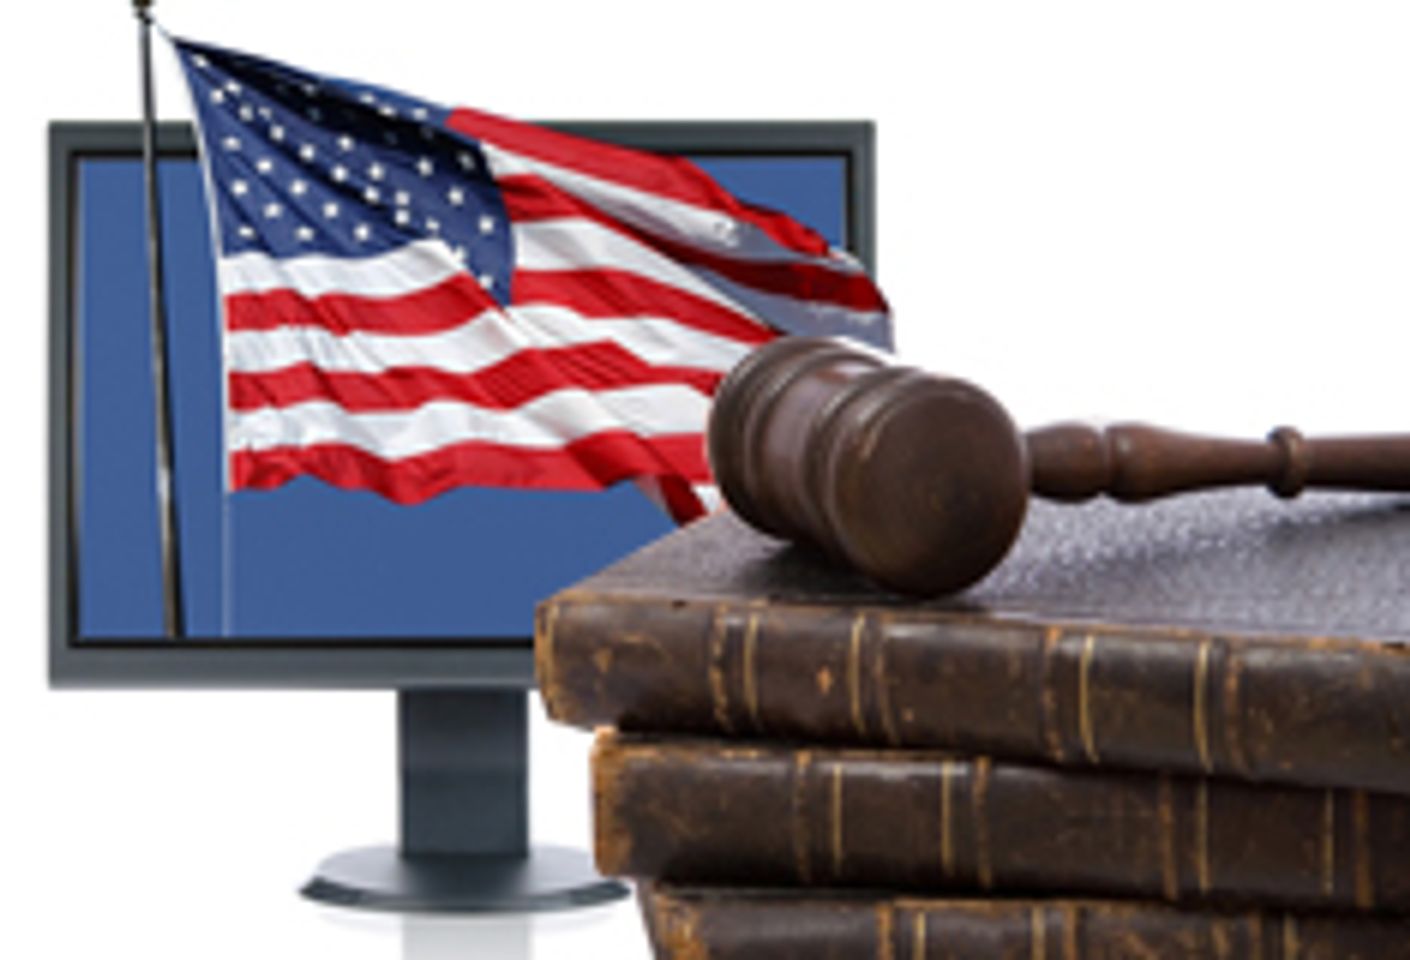 Judge Rules Content Owners Obliged to Consider Fair Use Before Issuing Takedowns